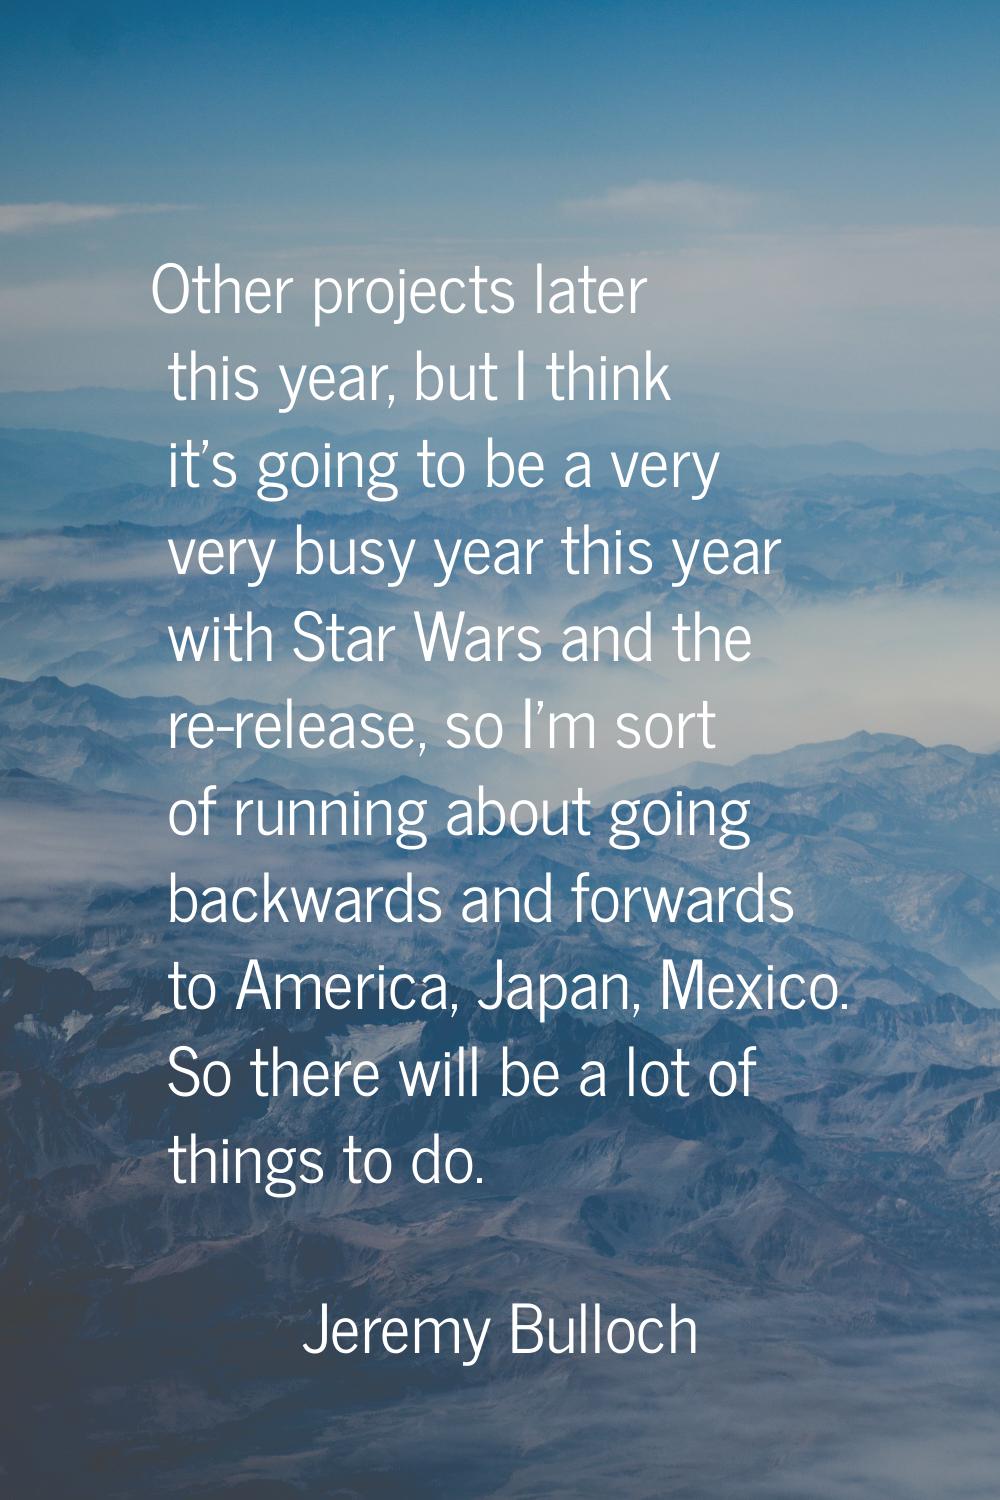 Other projects later this year, but I think it's going to be a very very busy year this year with S